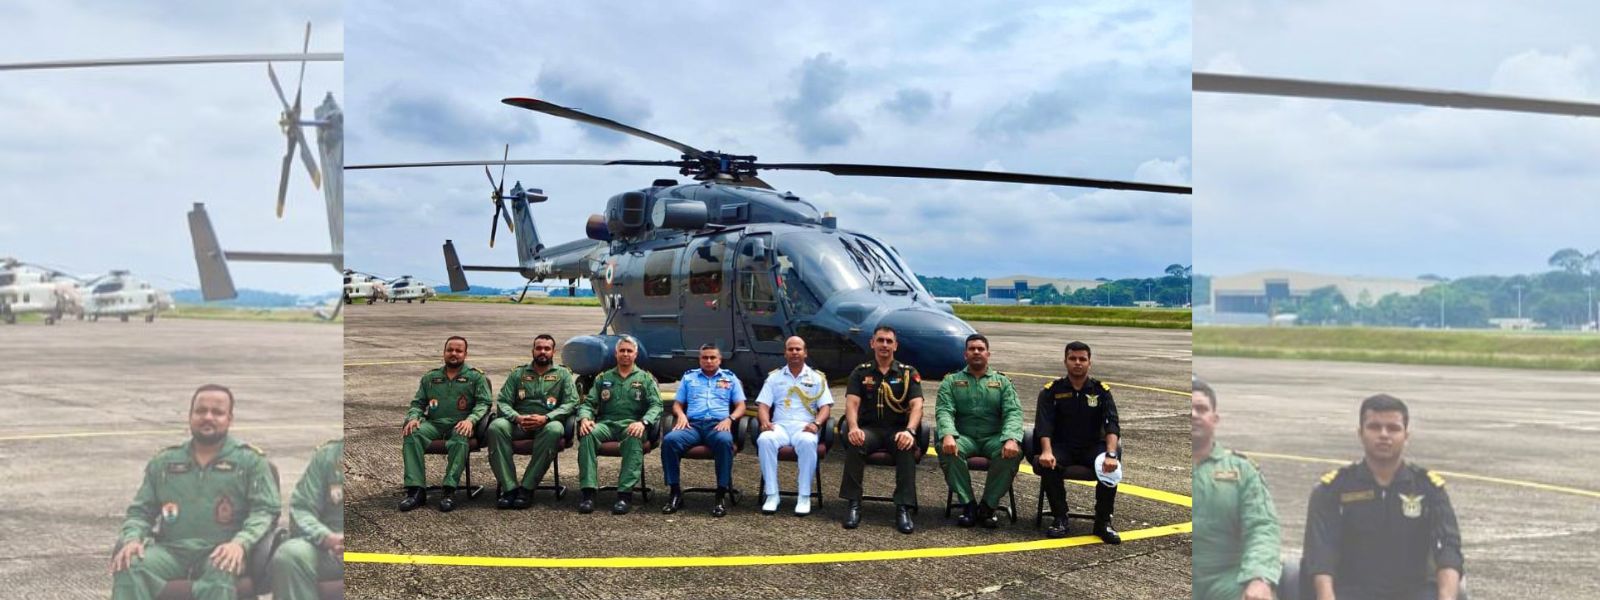 The Indian Navy's Advanced Light Helicopter in SL